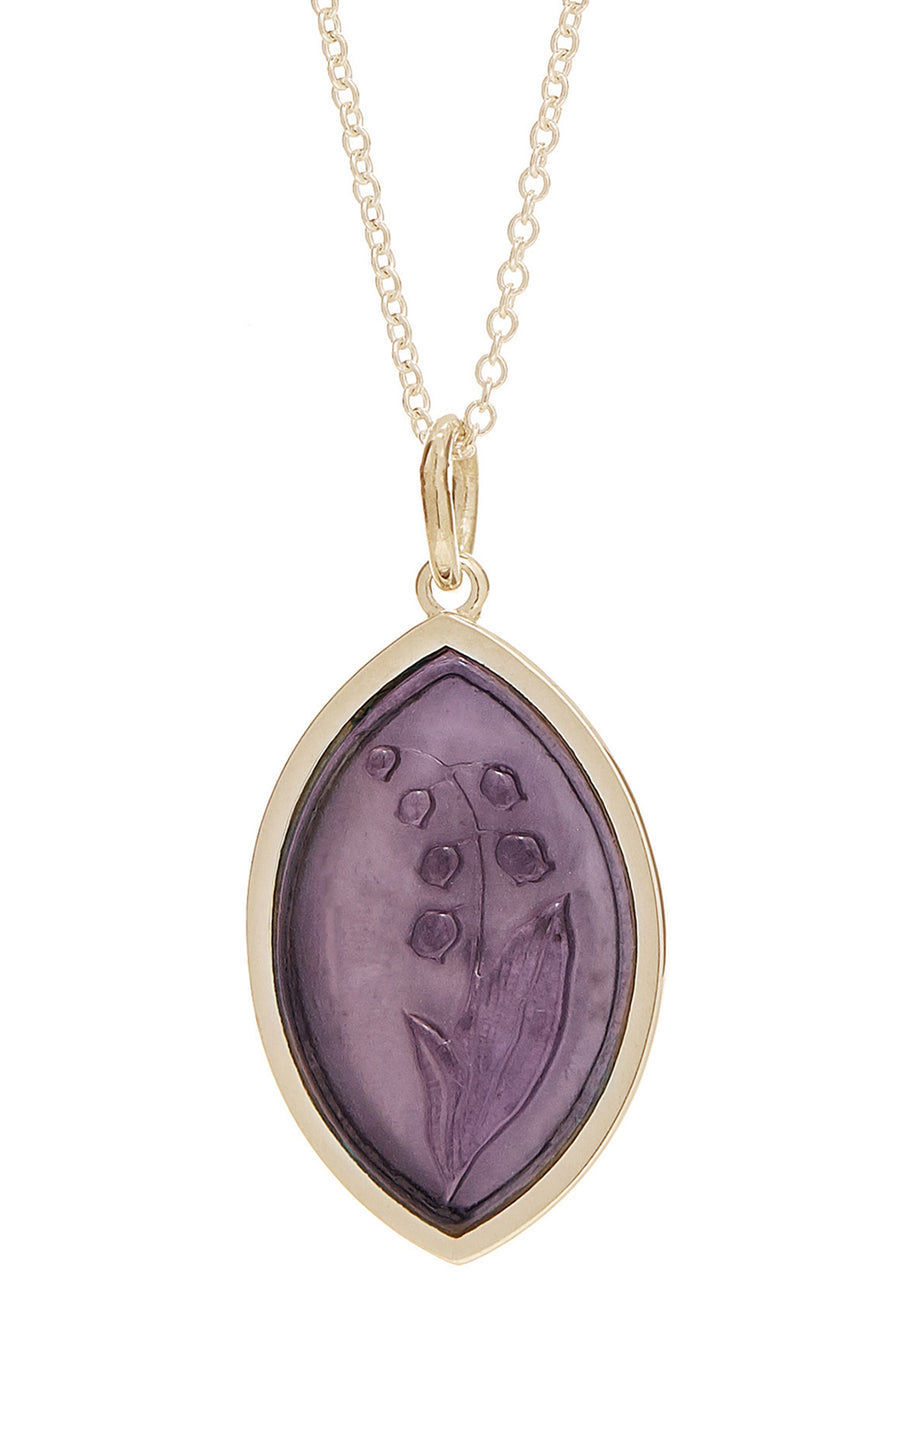 Lily of the Valley Intaglio Pendant